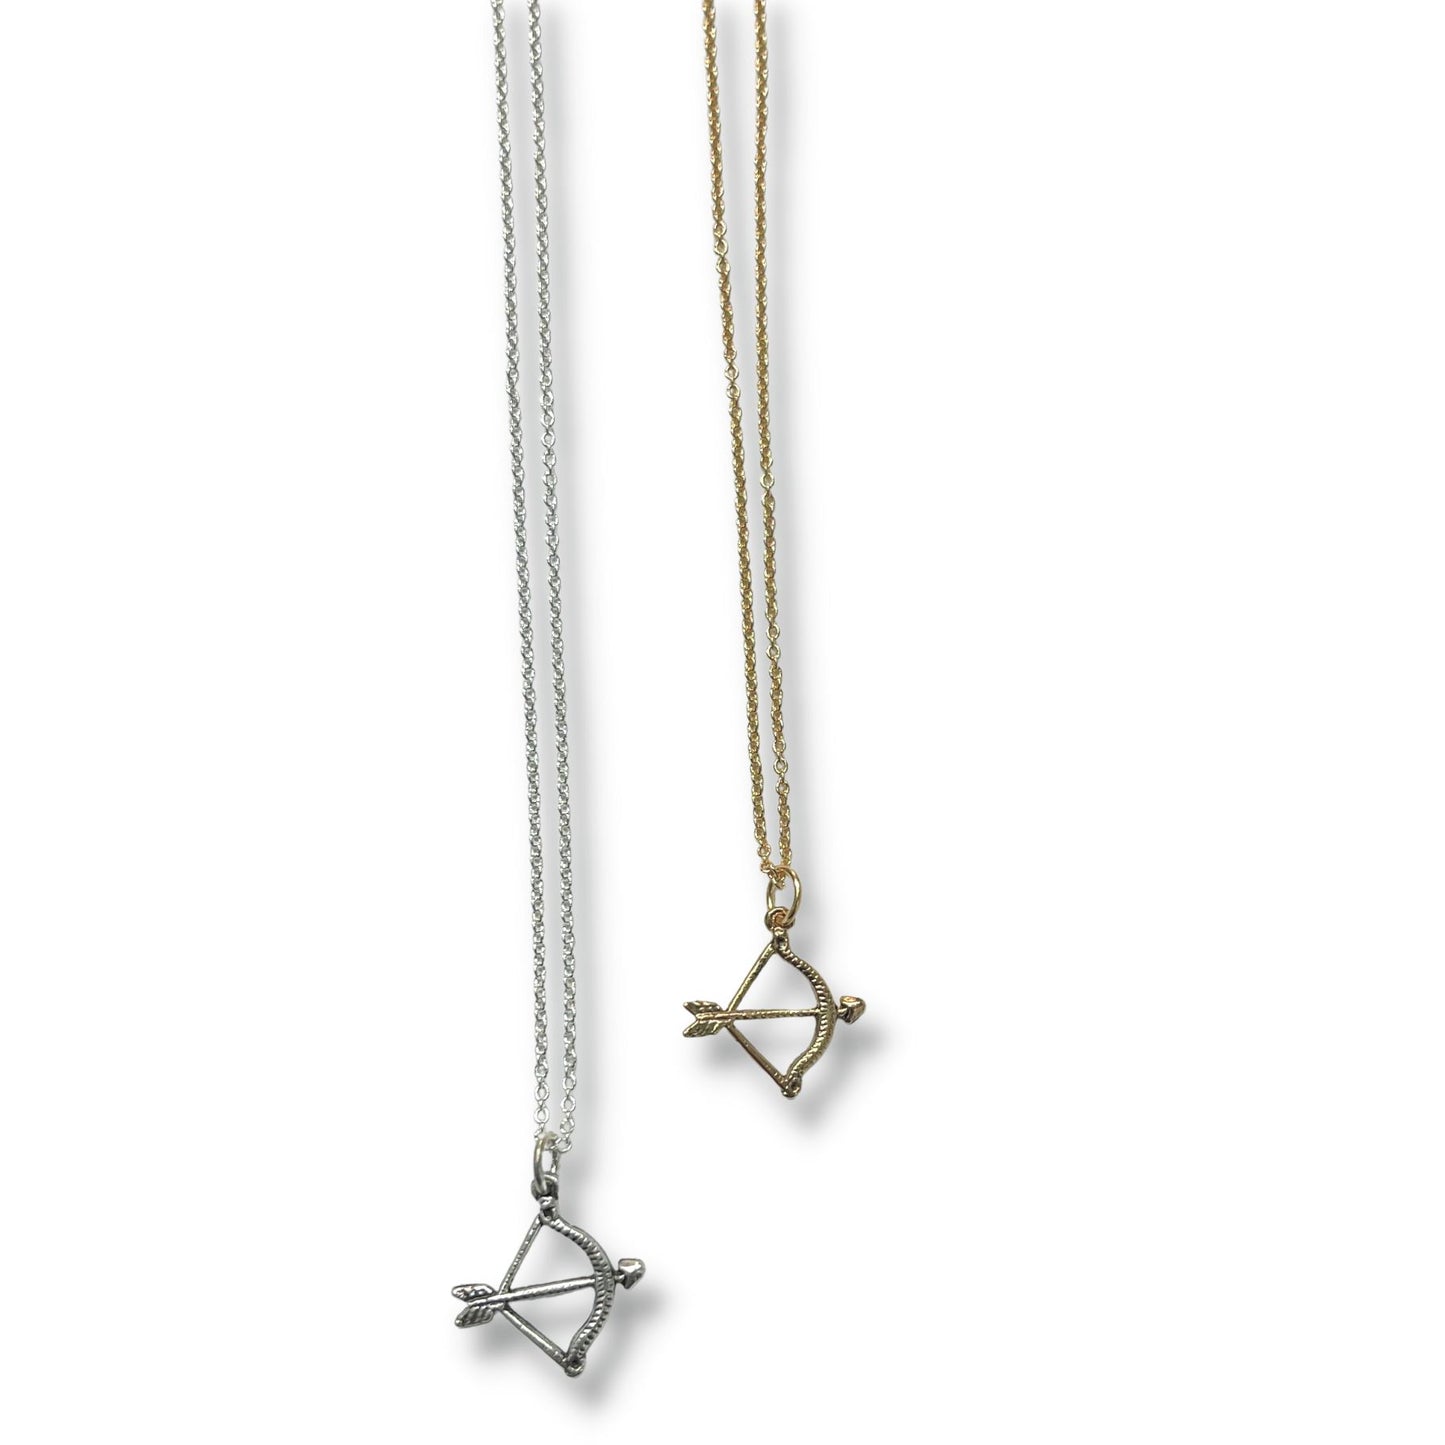 Launch forward with Cupids Arrow Necklace